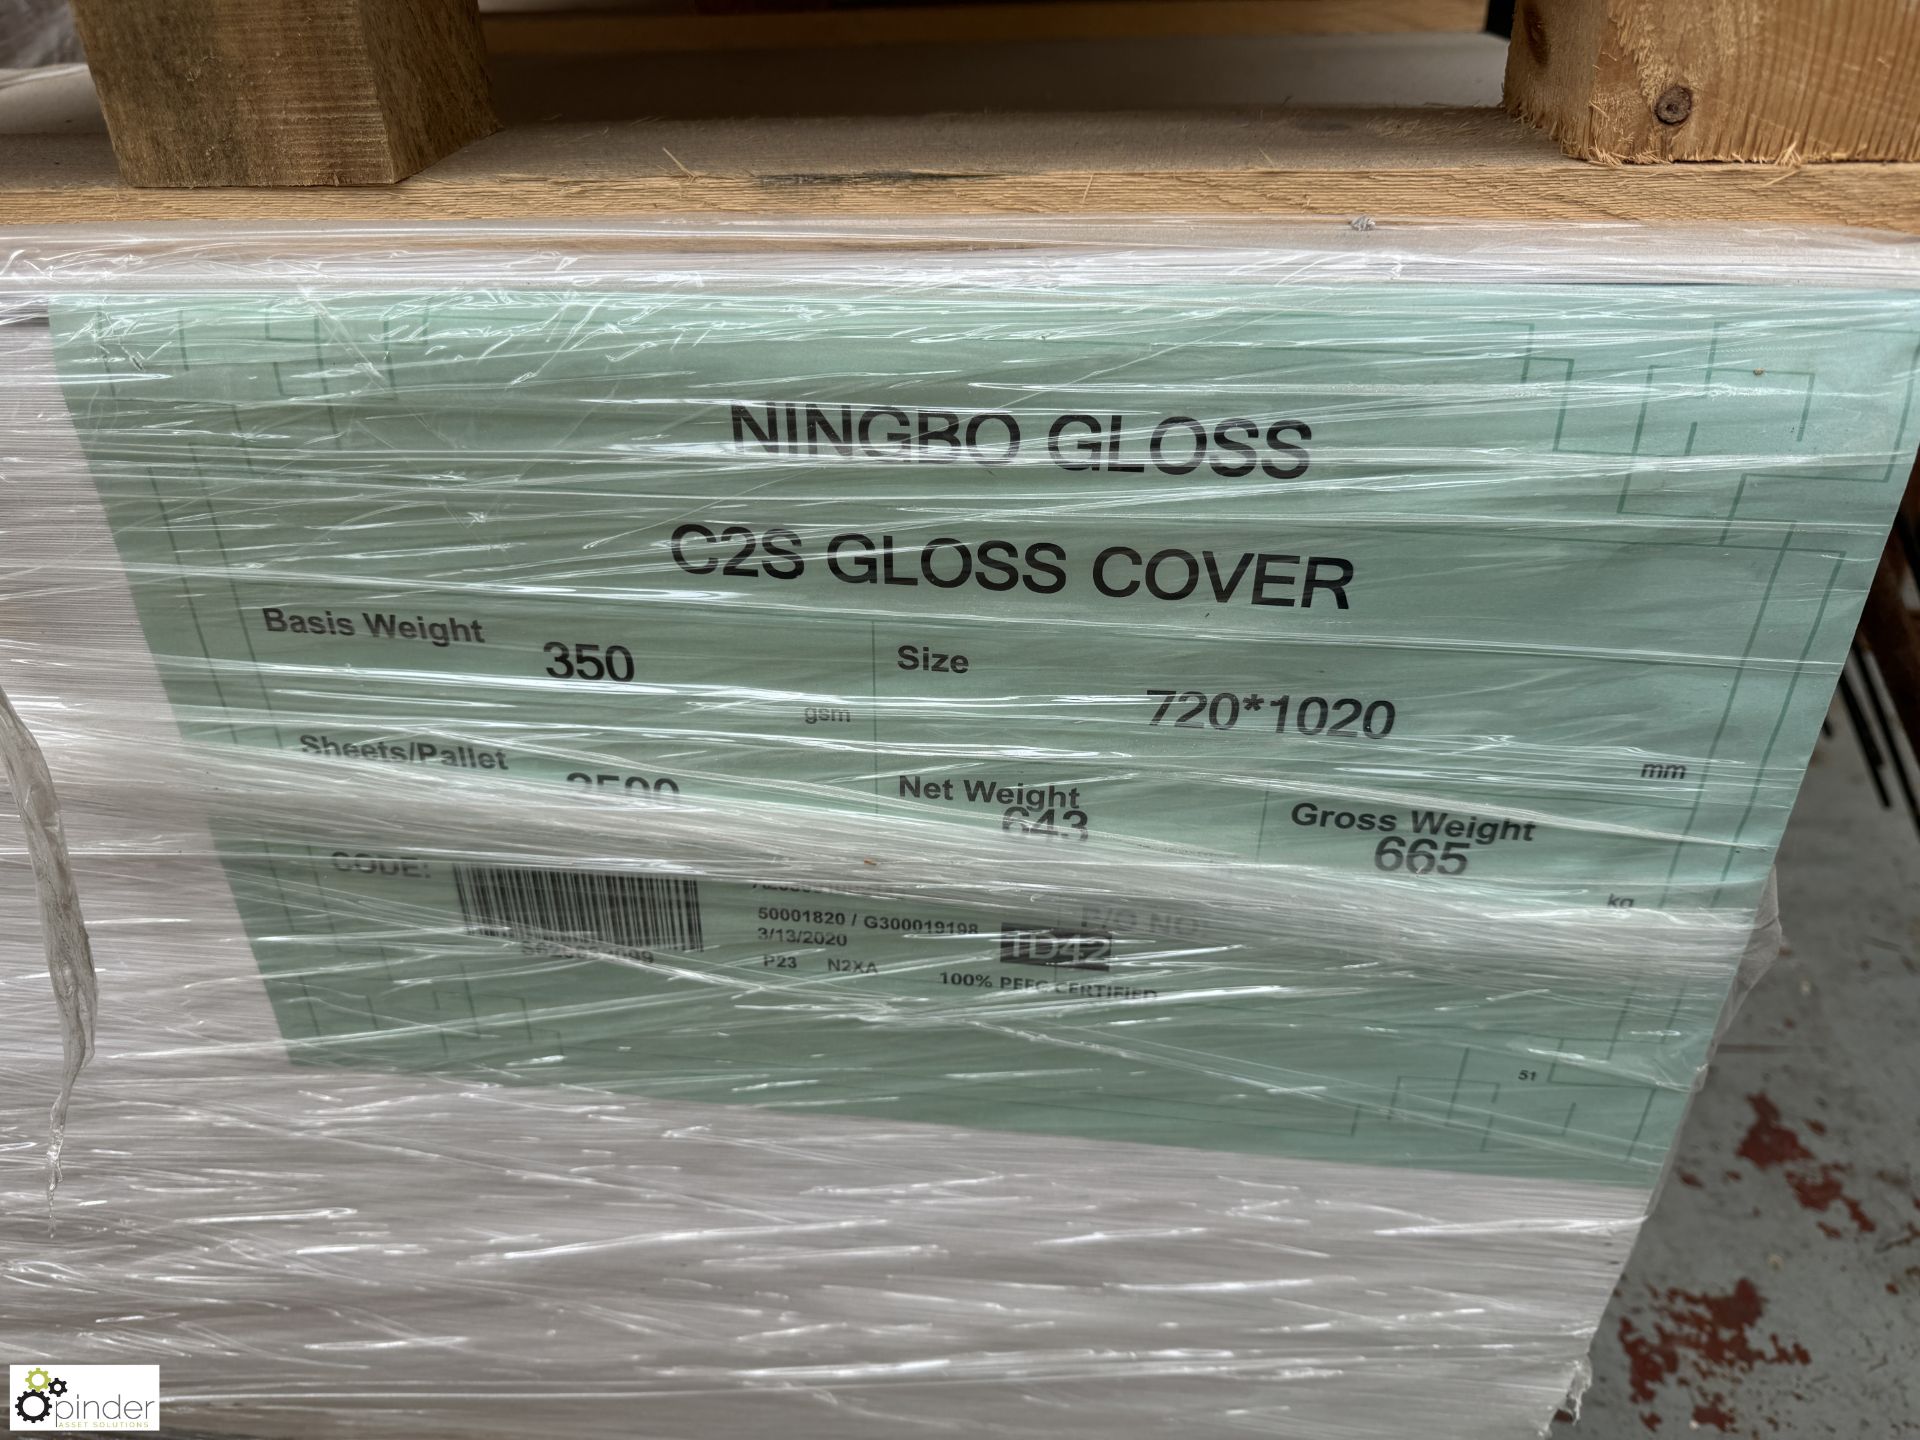 Quantity Nimbo C25 Gloss Card, 720mm x 1020mm, to 2 pallets - Image 3 of 4